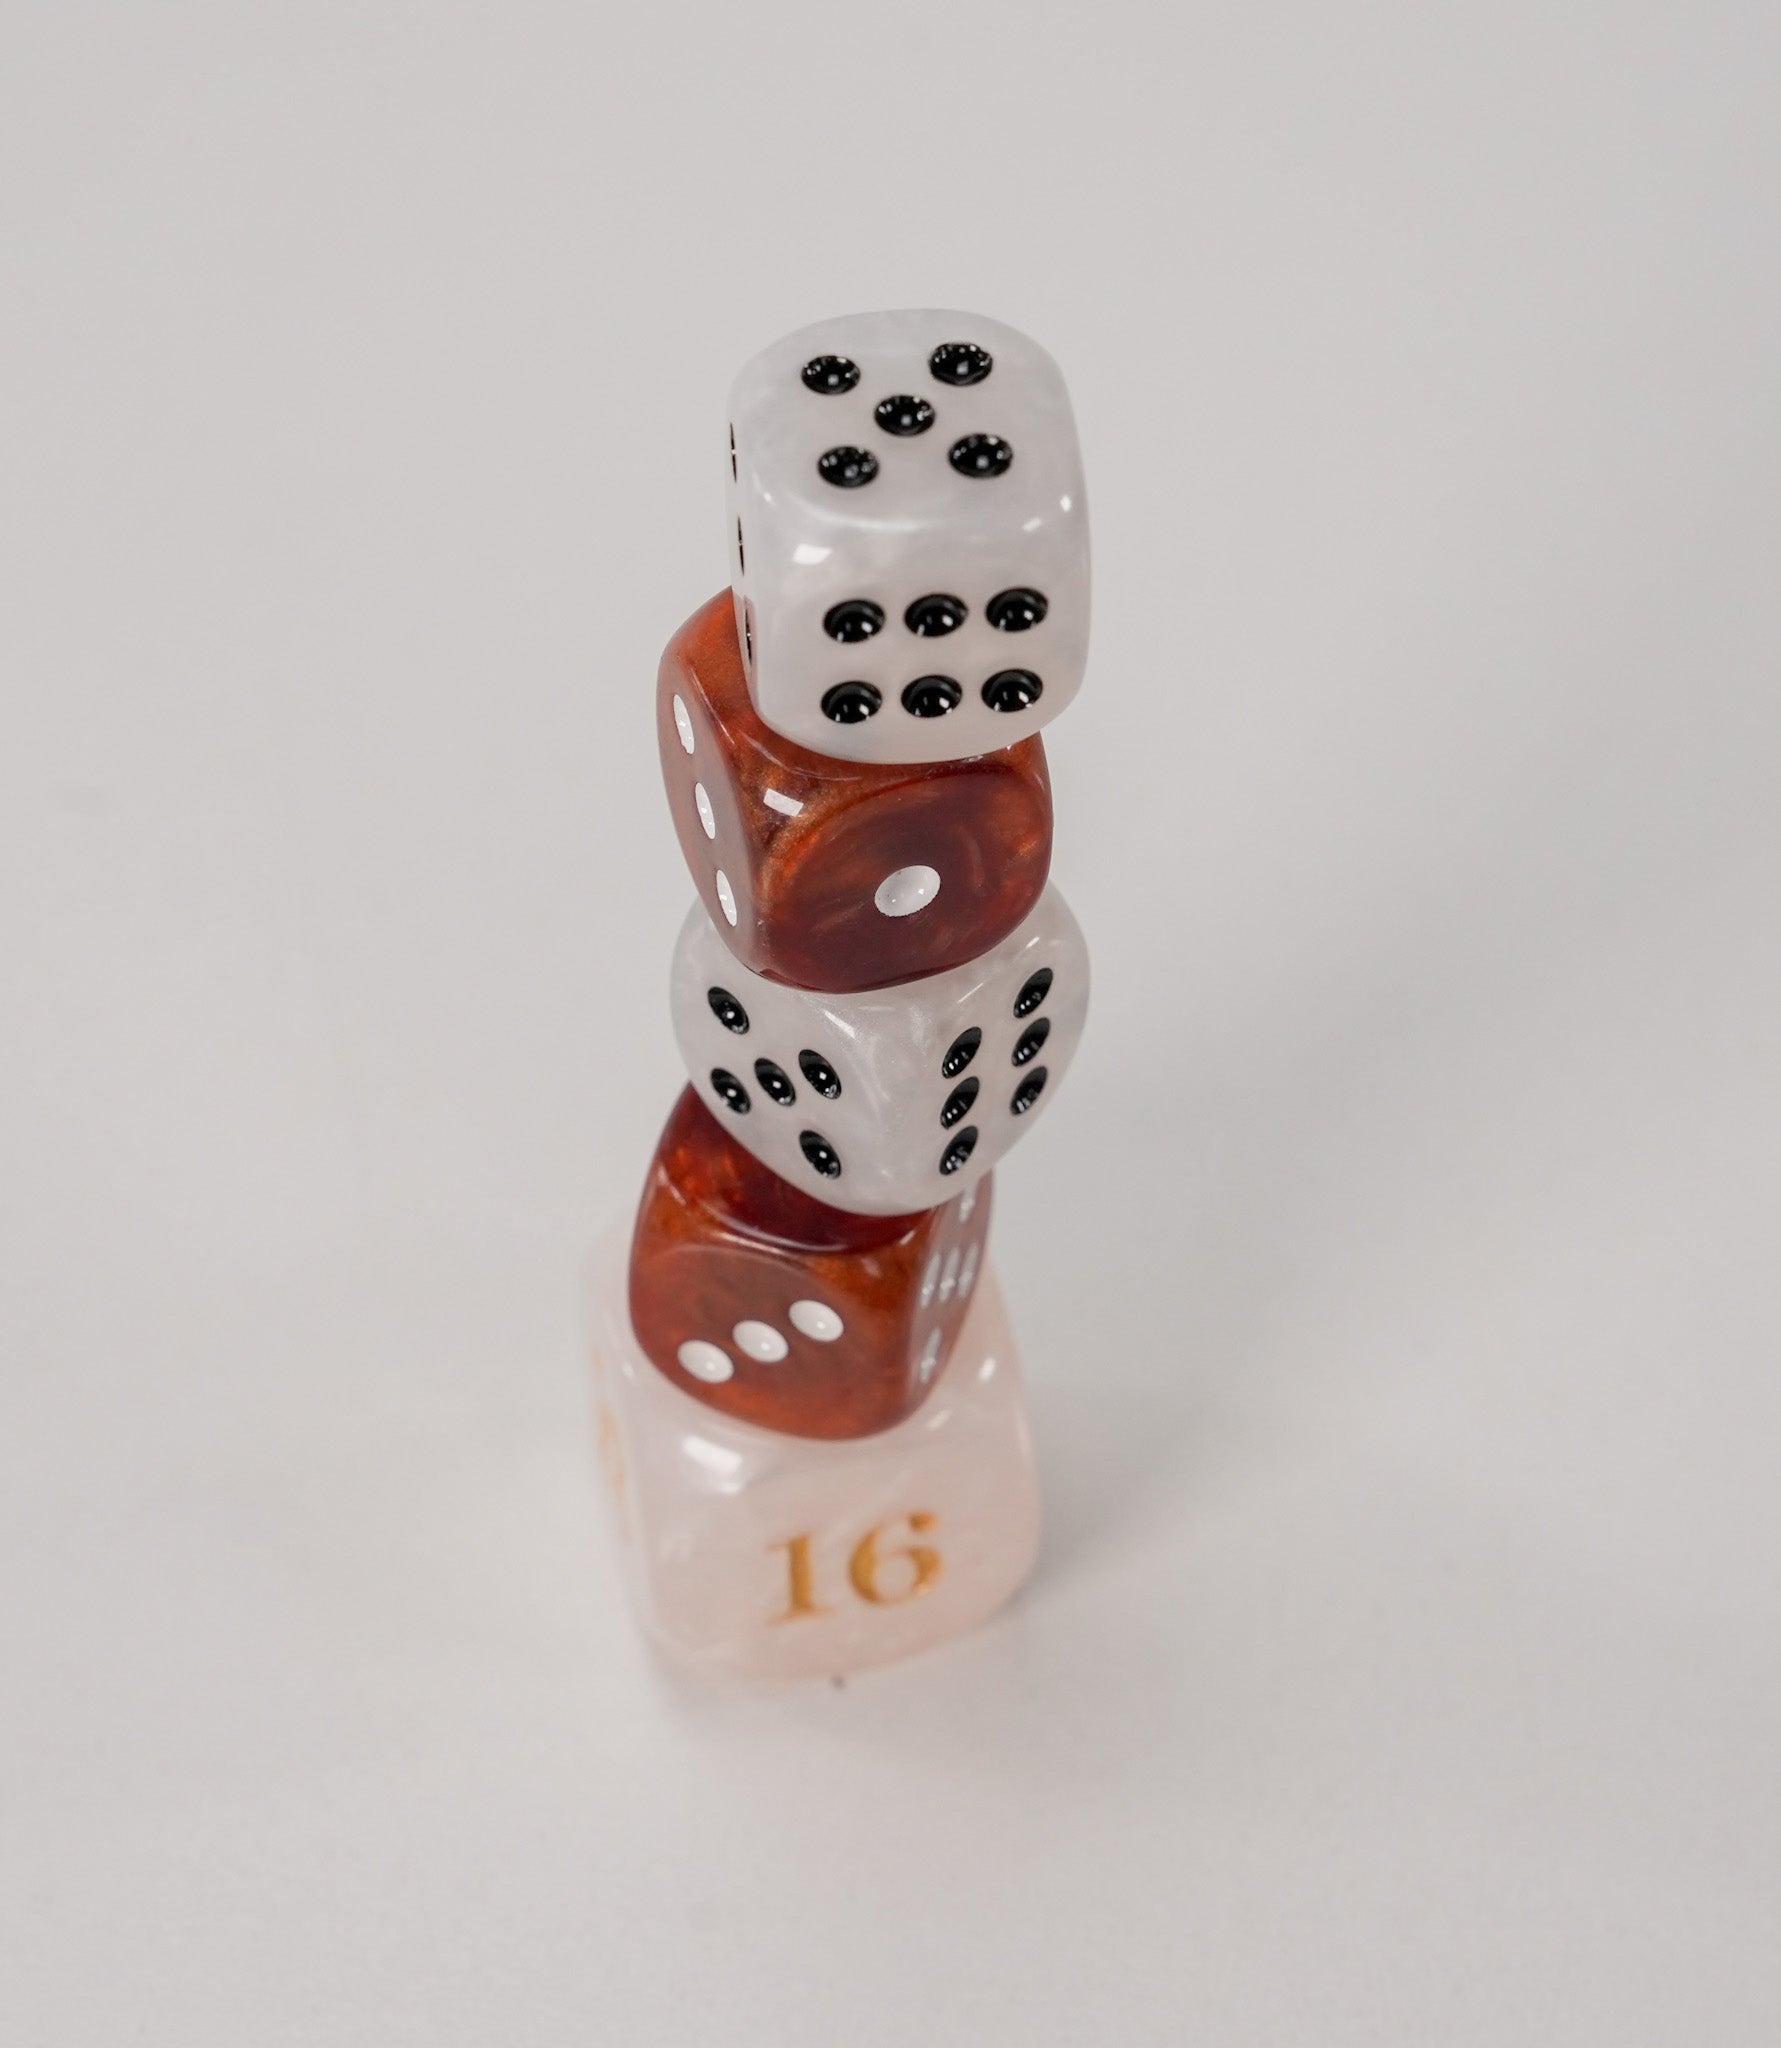 Backgammon Dice Set - Marbled - Game - Chess-House